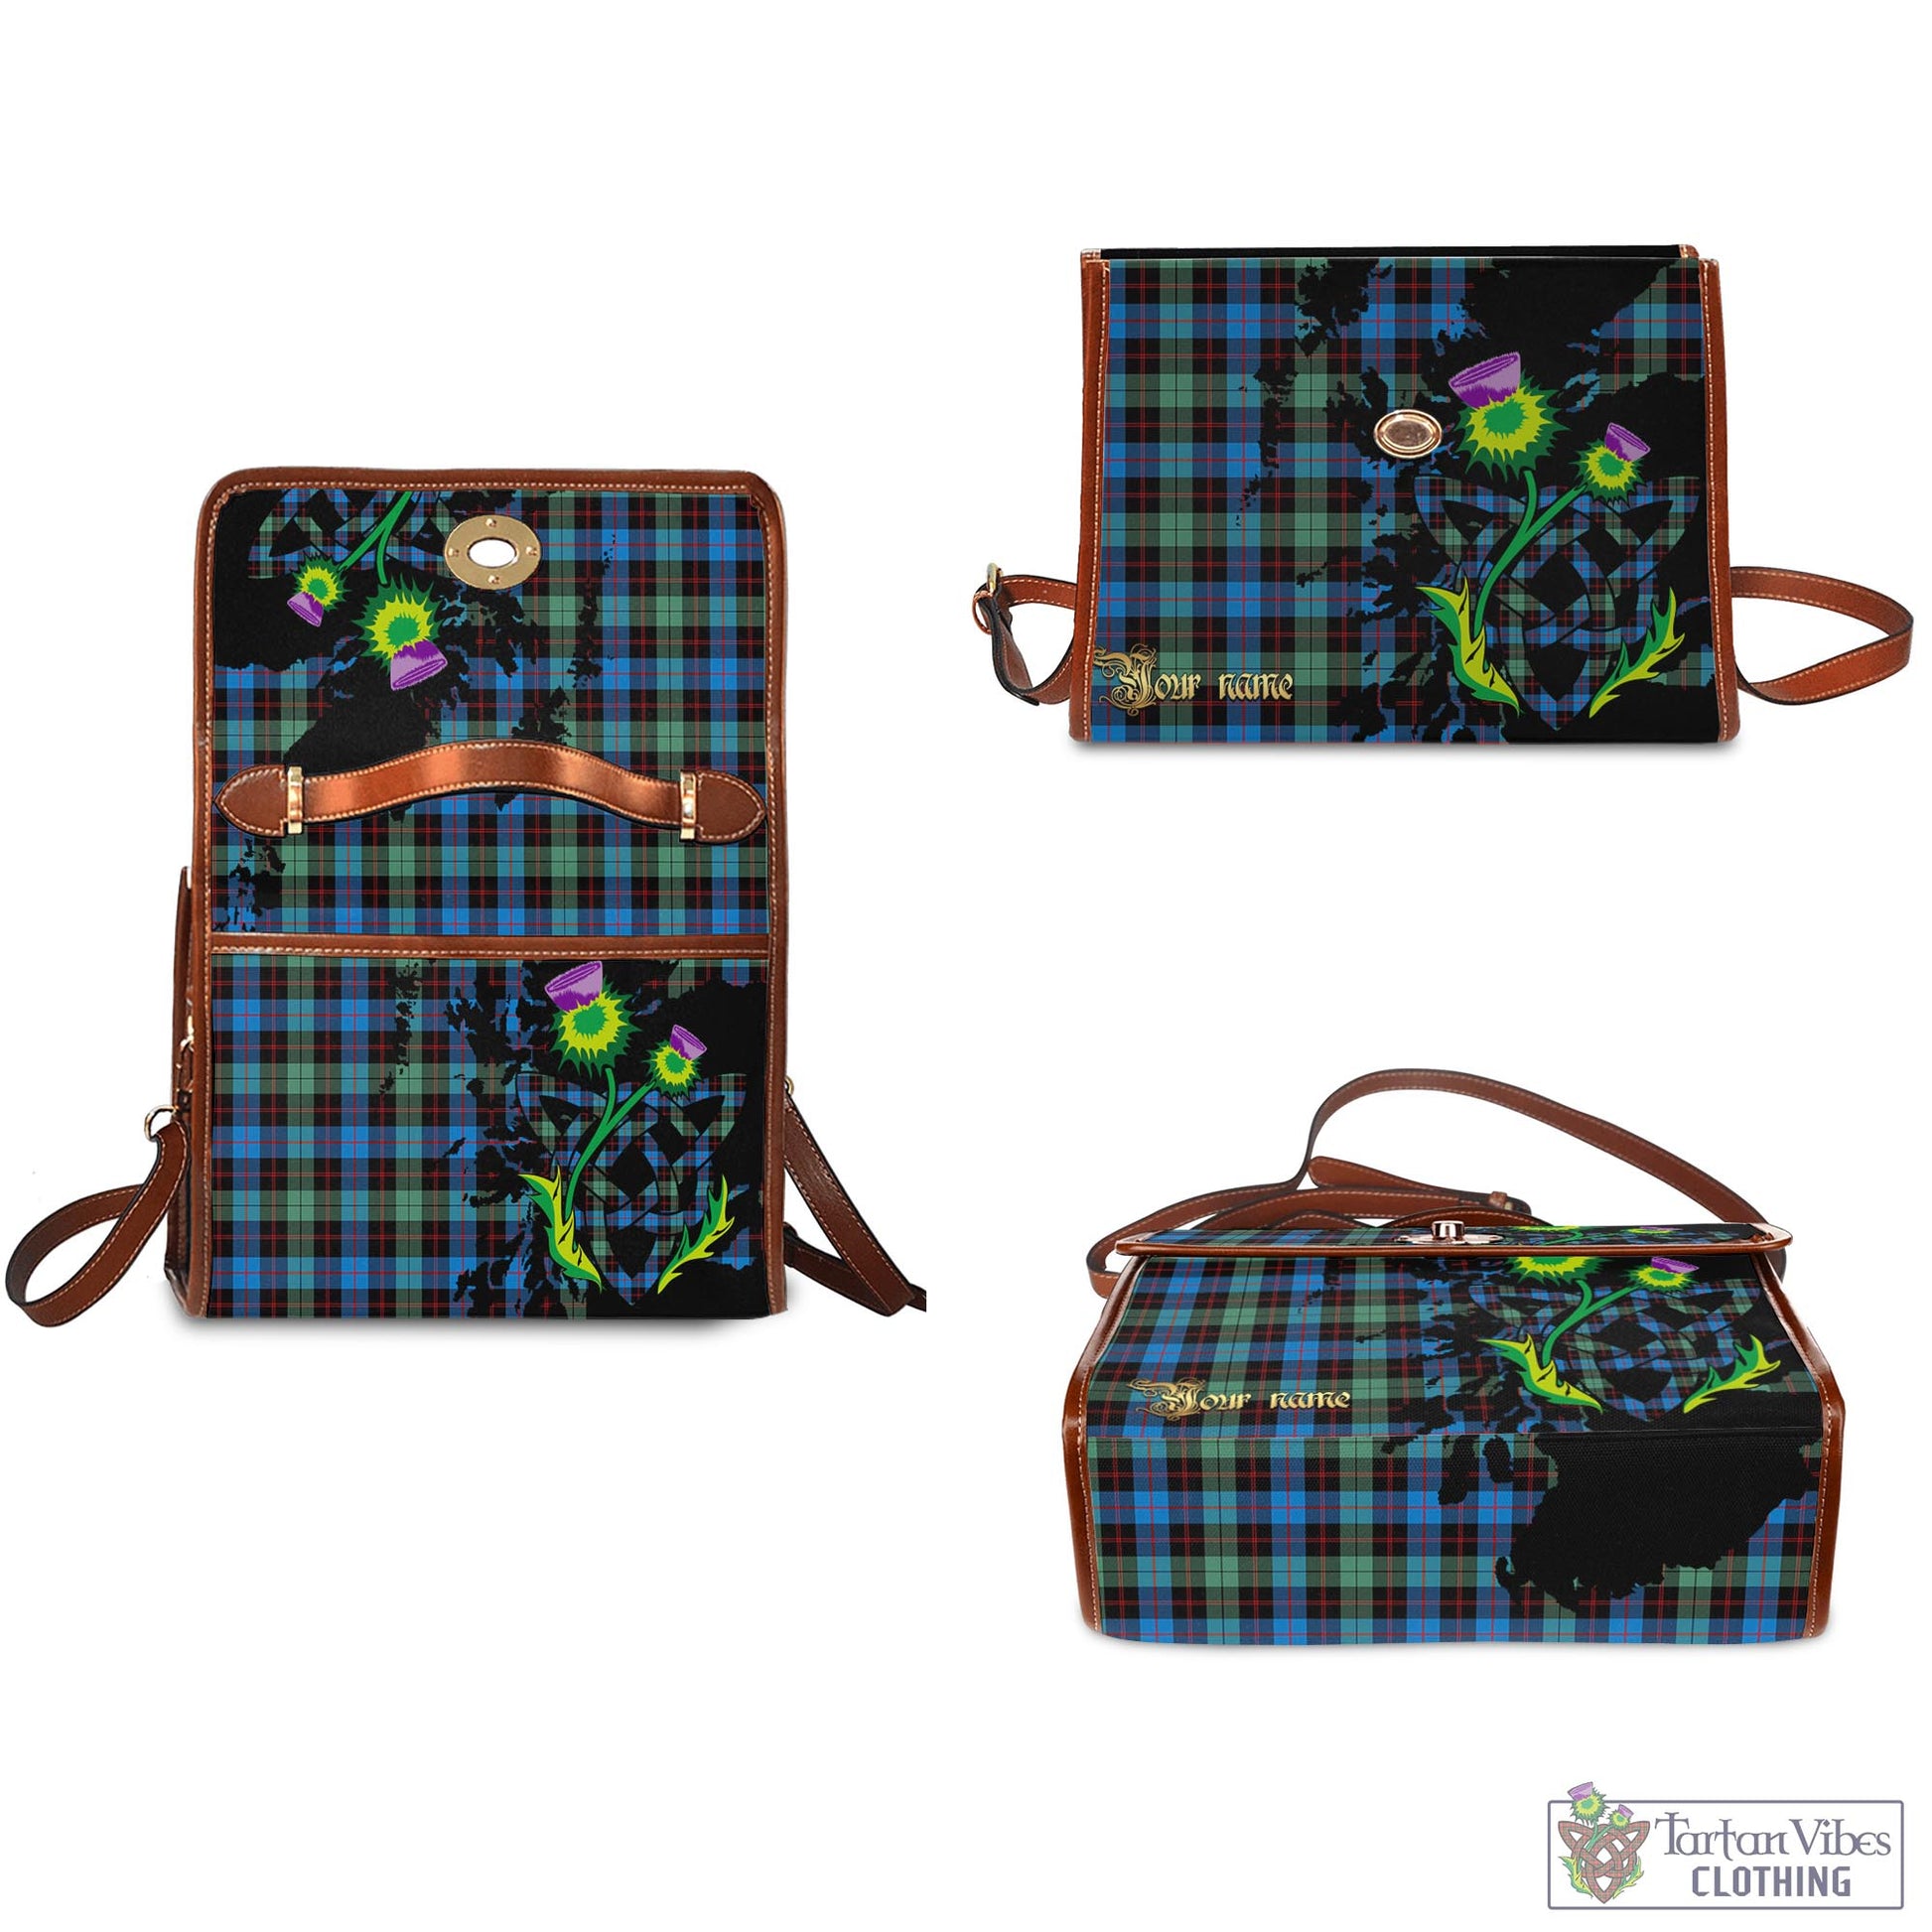 Tartan Vibes Clothing Guthrie Ancient Tartan Waterproof Canvas Bag with Scotland Map and Thistle Celtic Accents